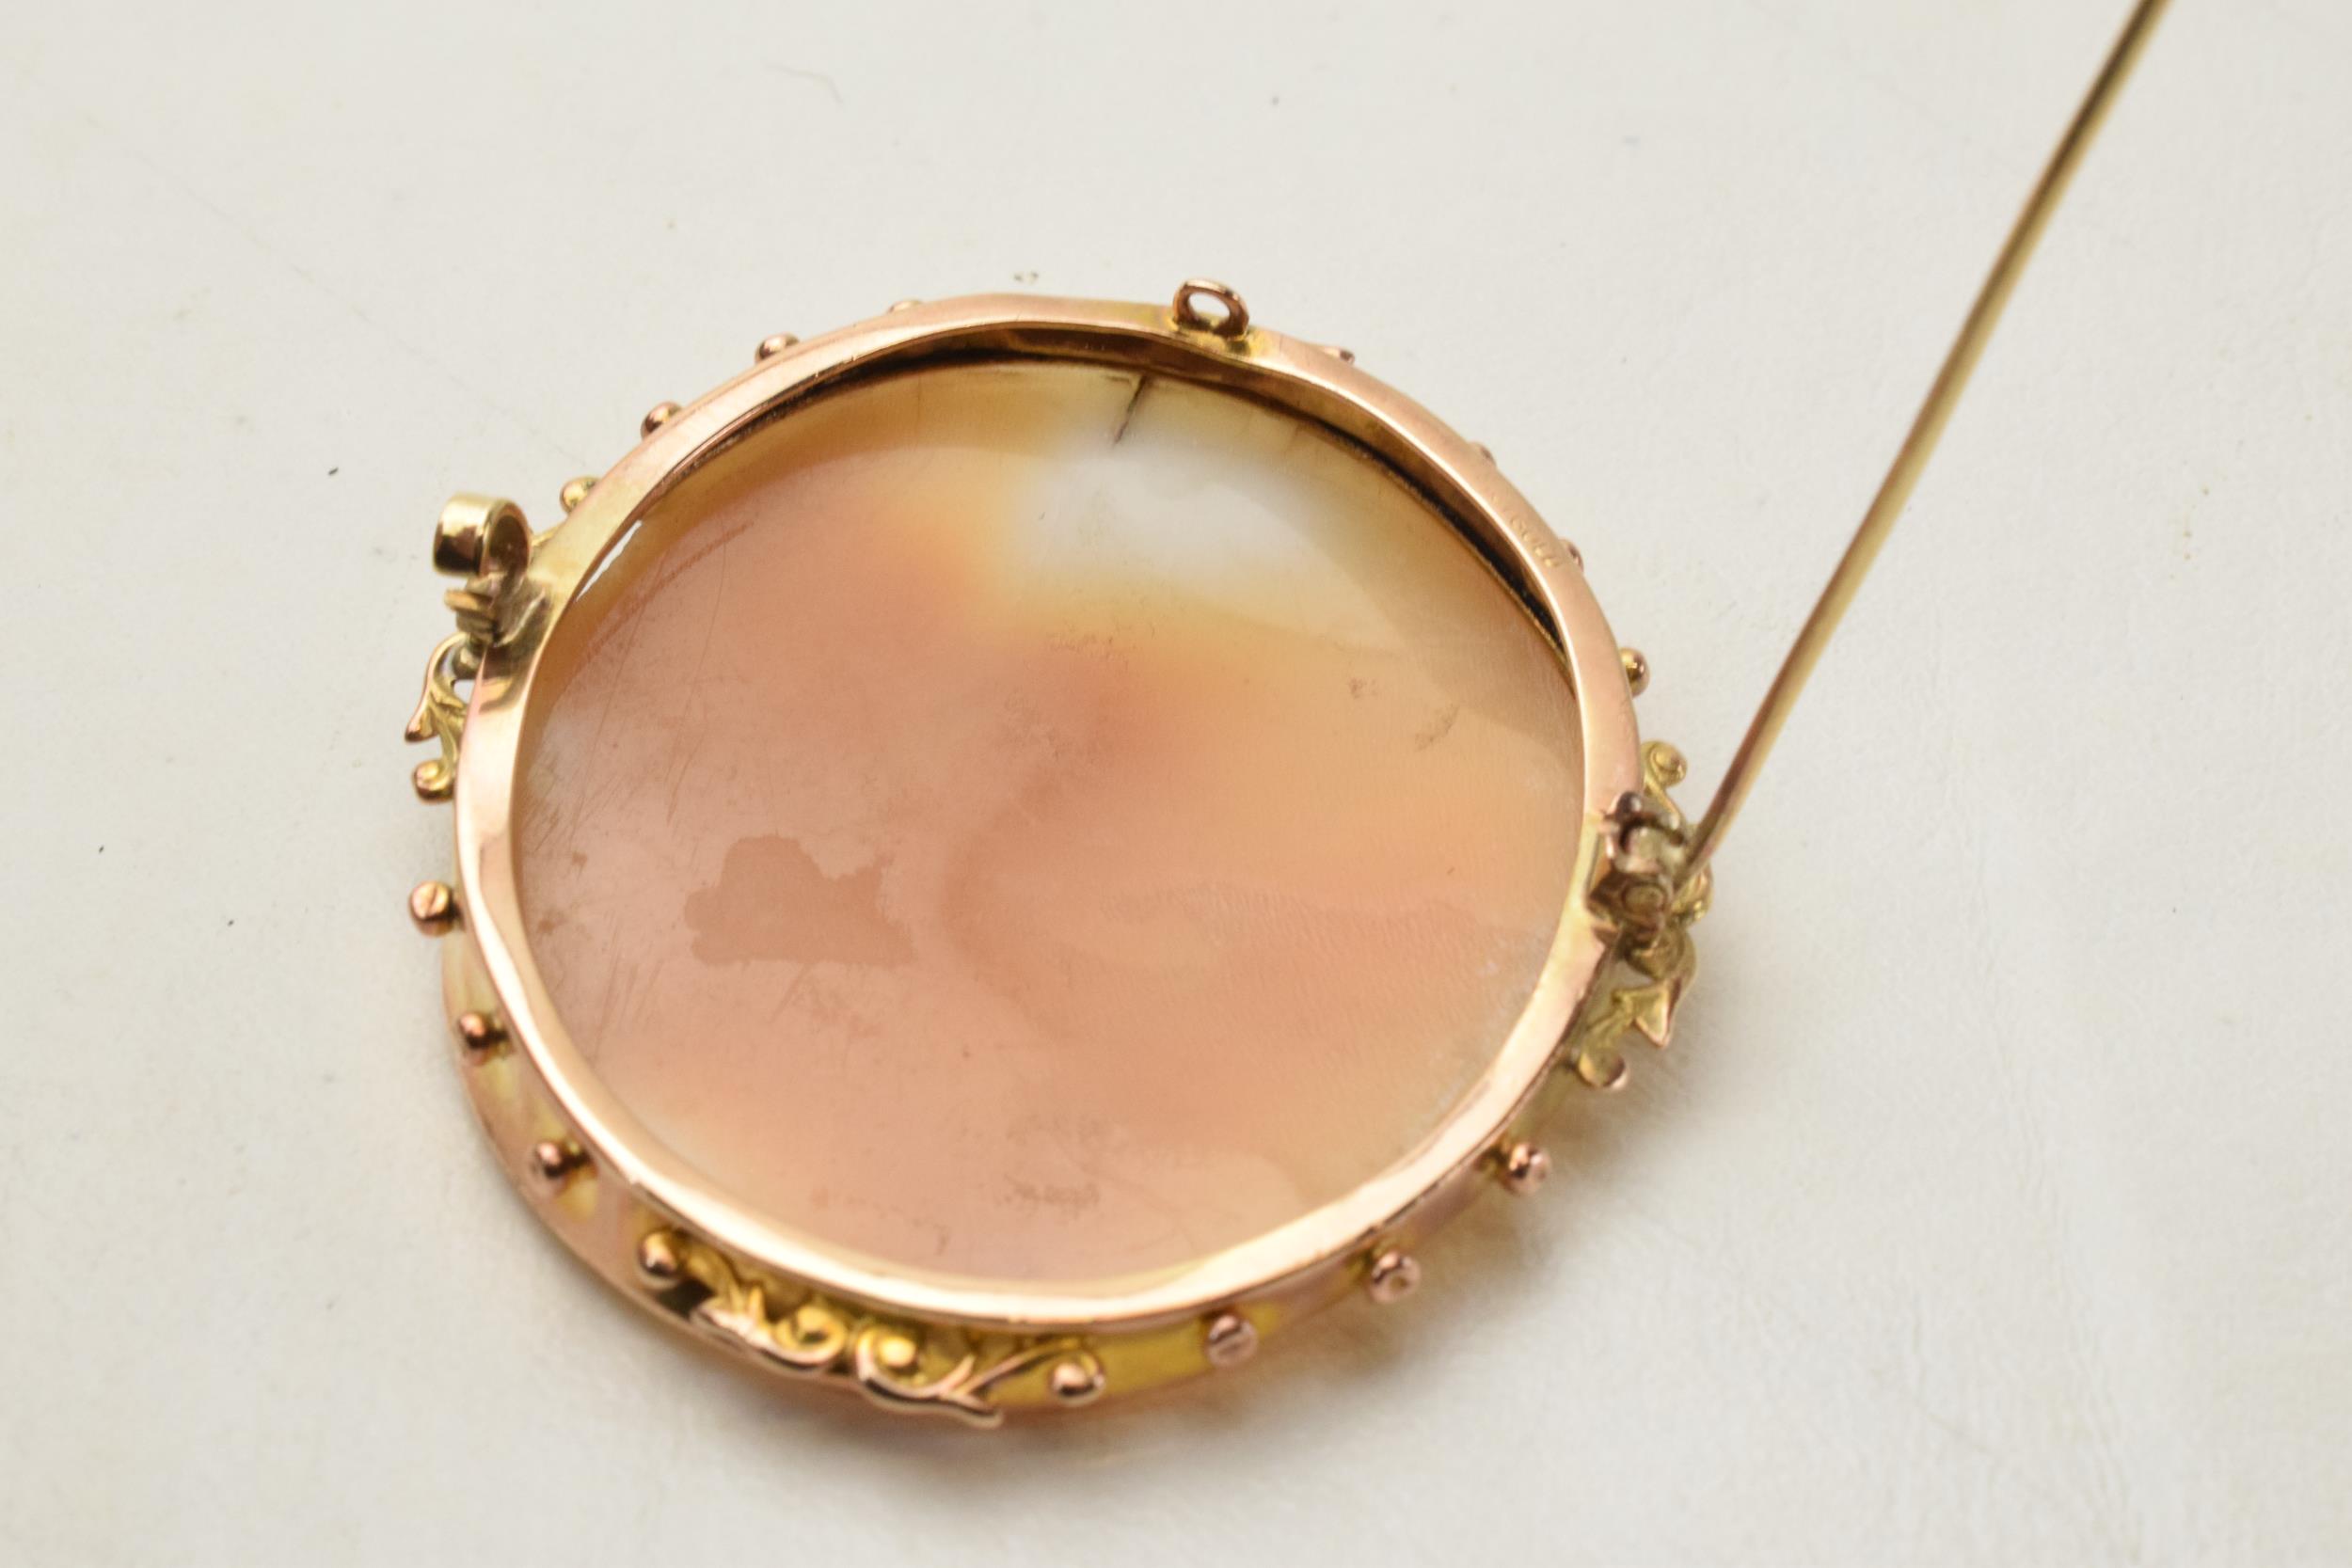 9ct gold framed Brittania scene cameo, 11.2 grams gross weight, 5cm tall. - Image 2 of 2